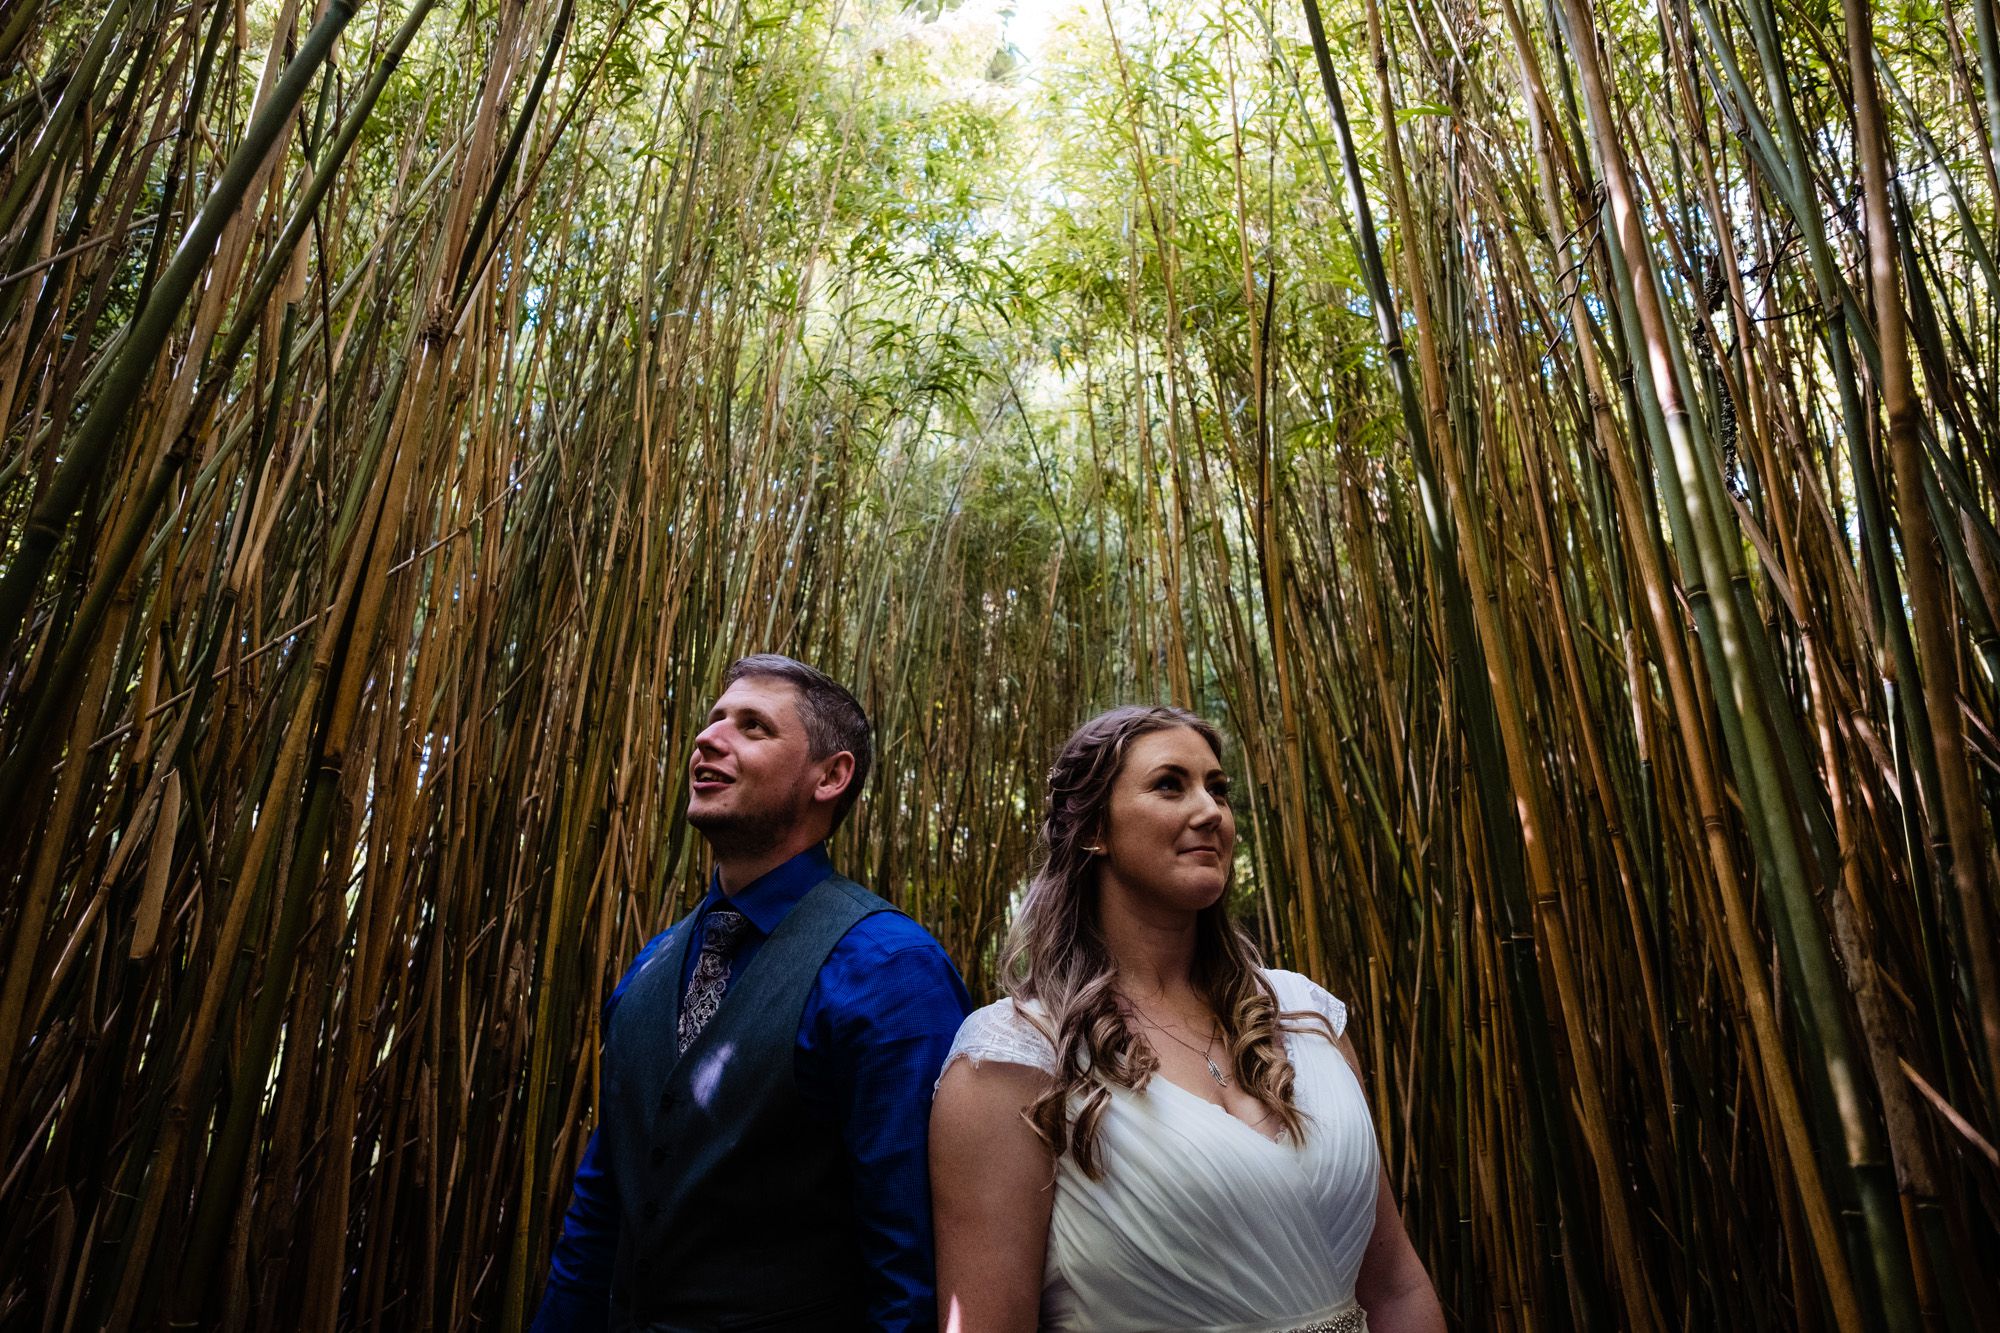 inish-beg-wedding-bamboo-forest-bride-and-groom